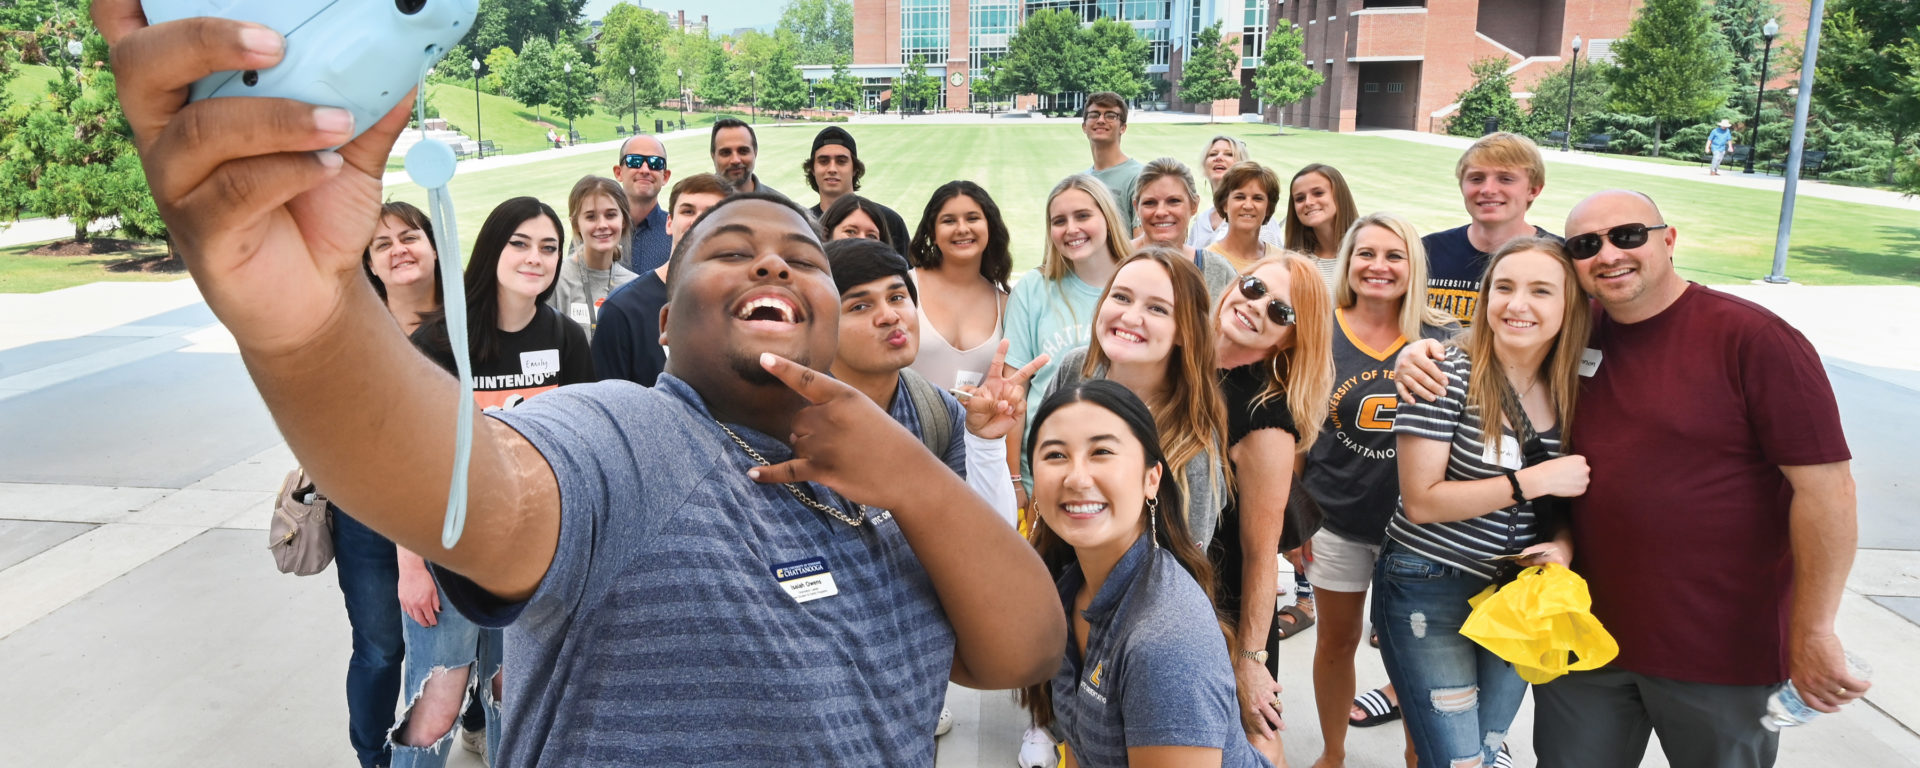 An orientation leader takes a group selfie with a crowd on UTC's campus